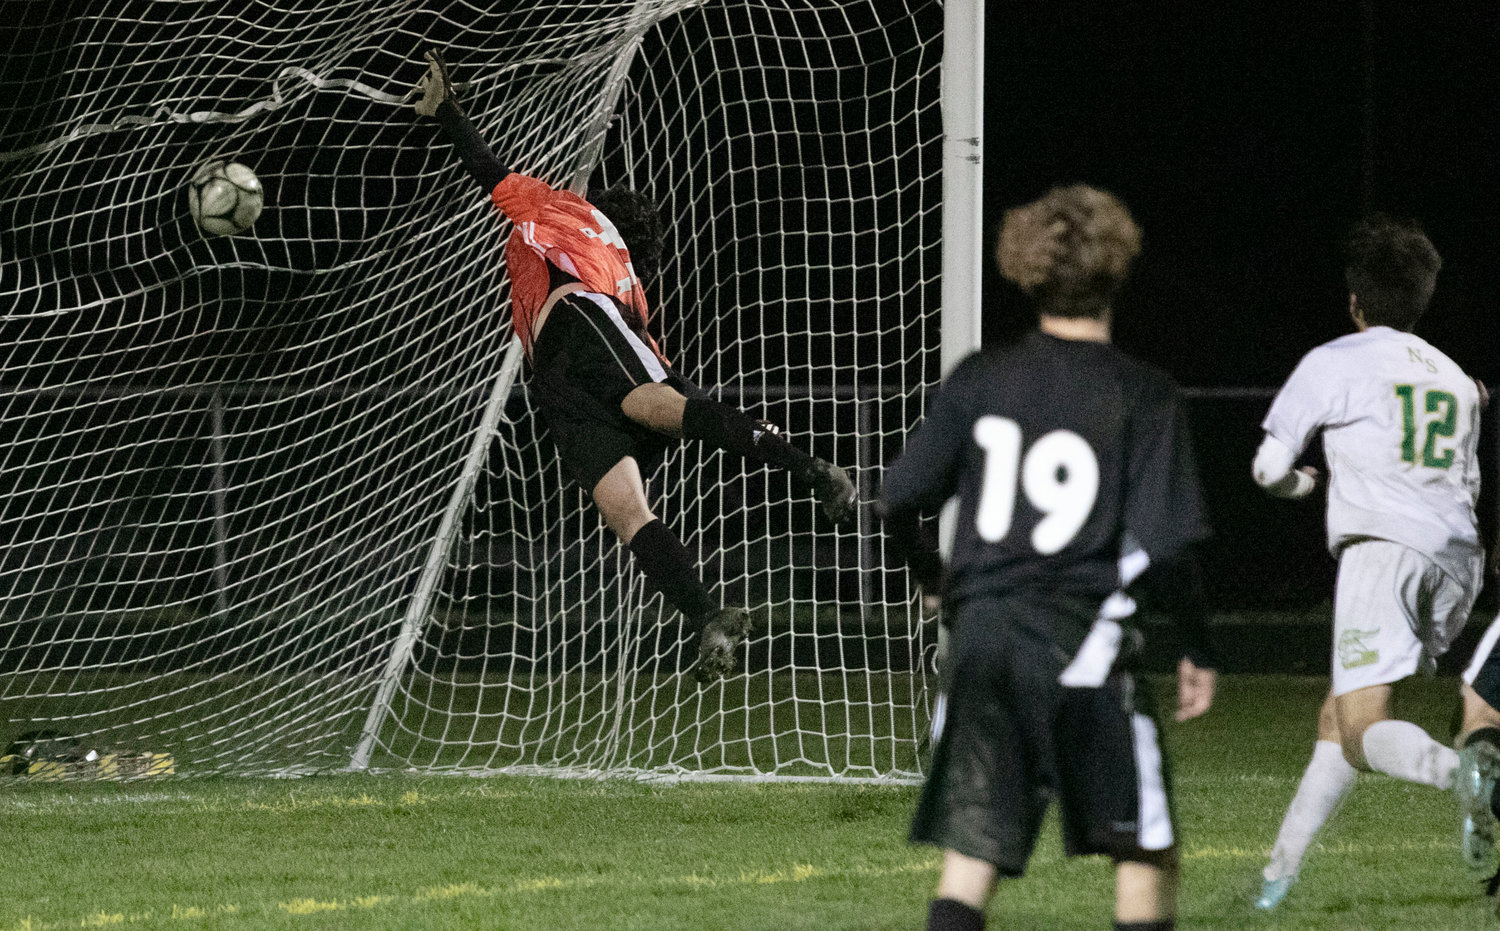 Midfielder Holden Tousignant kicked a beautiful shot over the wall and into the top right corner of the goal by a diving Terceiro to give North Smithfield a, 2-1, lead. 
“I think Matt couldn’t see from behind the wall,” said Coach Couto. “The ball also had some movement on it. He had a good read, then it started to bend and tail the other way. To win a game like this, that’s what you need. It comes down to a free kick and they score with 15 minutes left. It’s tough to come back from.”